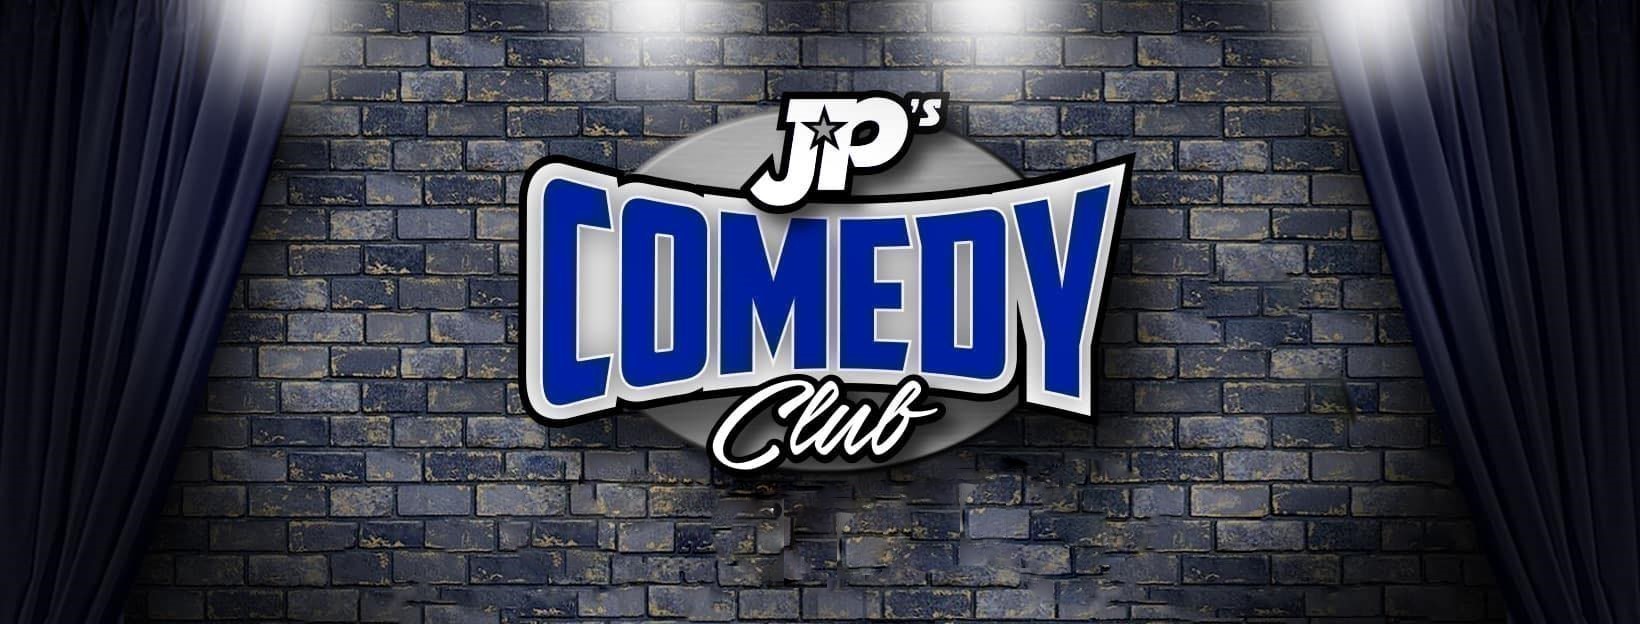 FREE Comedy Show in Gilbert (National Touring Comedian and Friends Show)- Reservation Required, Gilbert, Arizona, United States